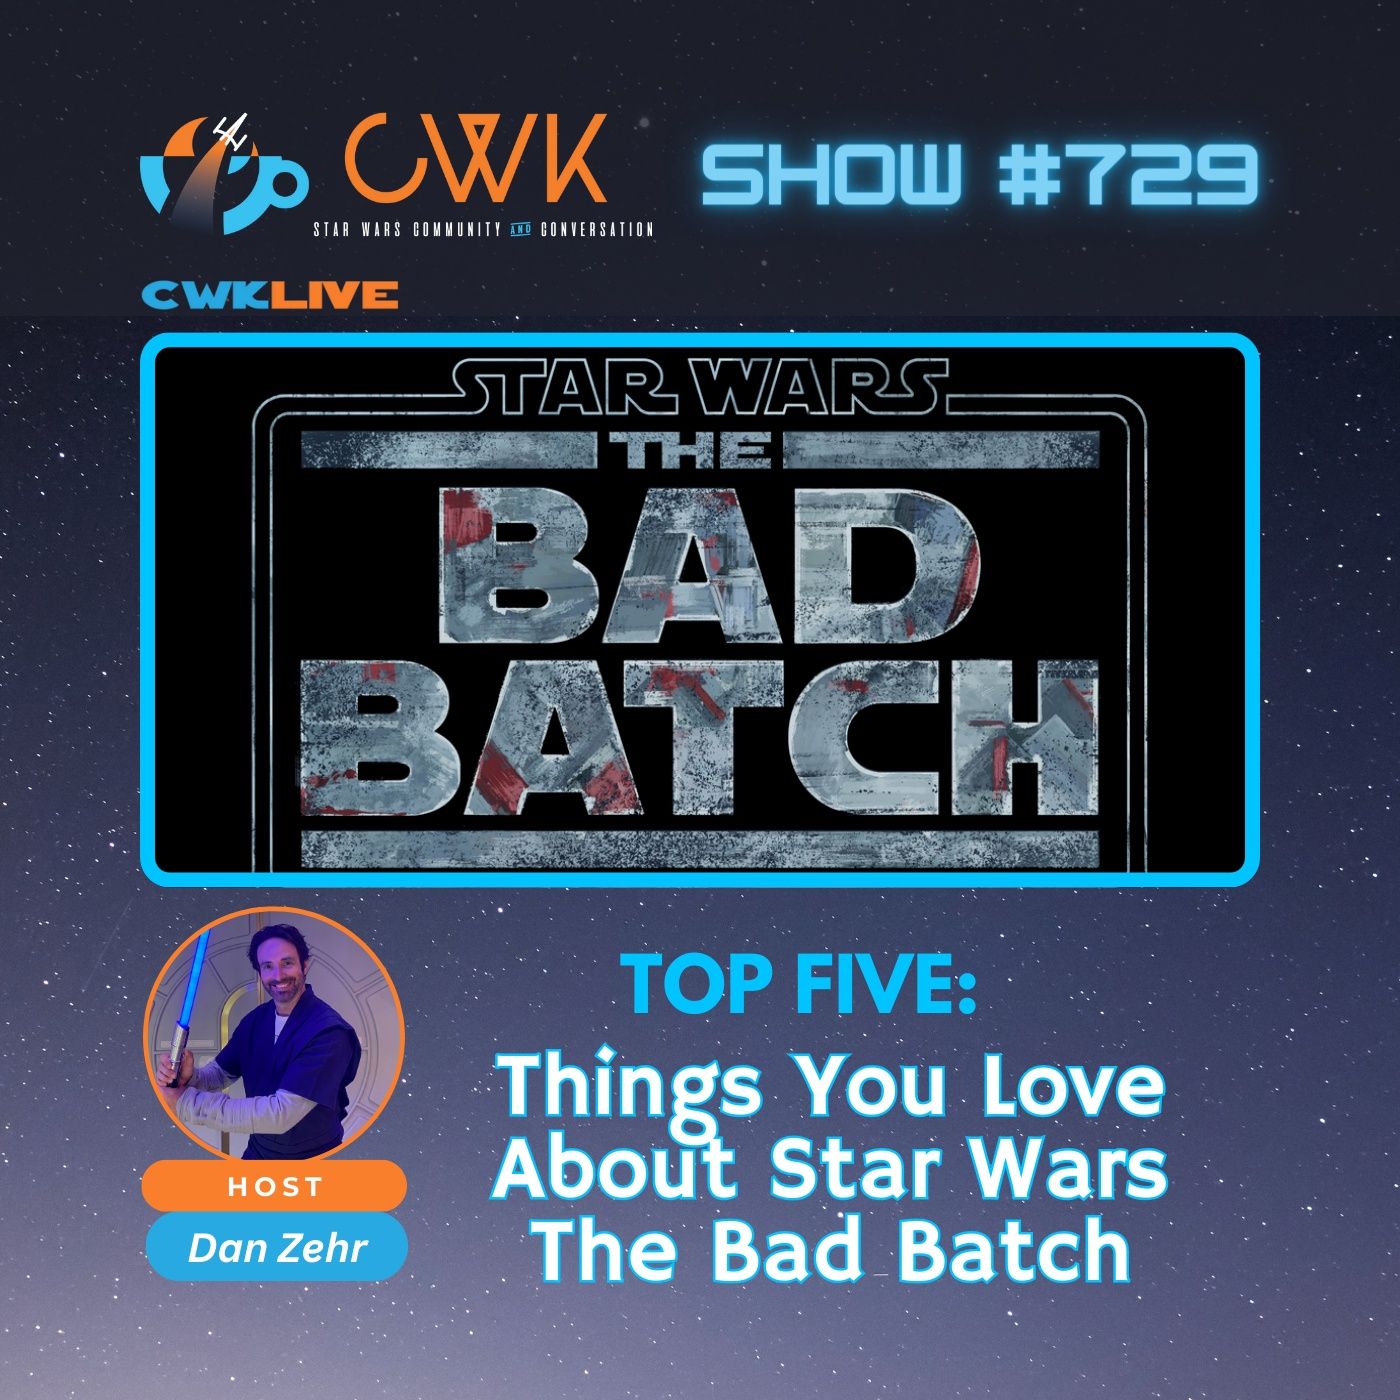 CWK Show #729 LIVE: Top Five Things You Love About Star Wars The Bad Batch